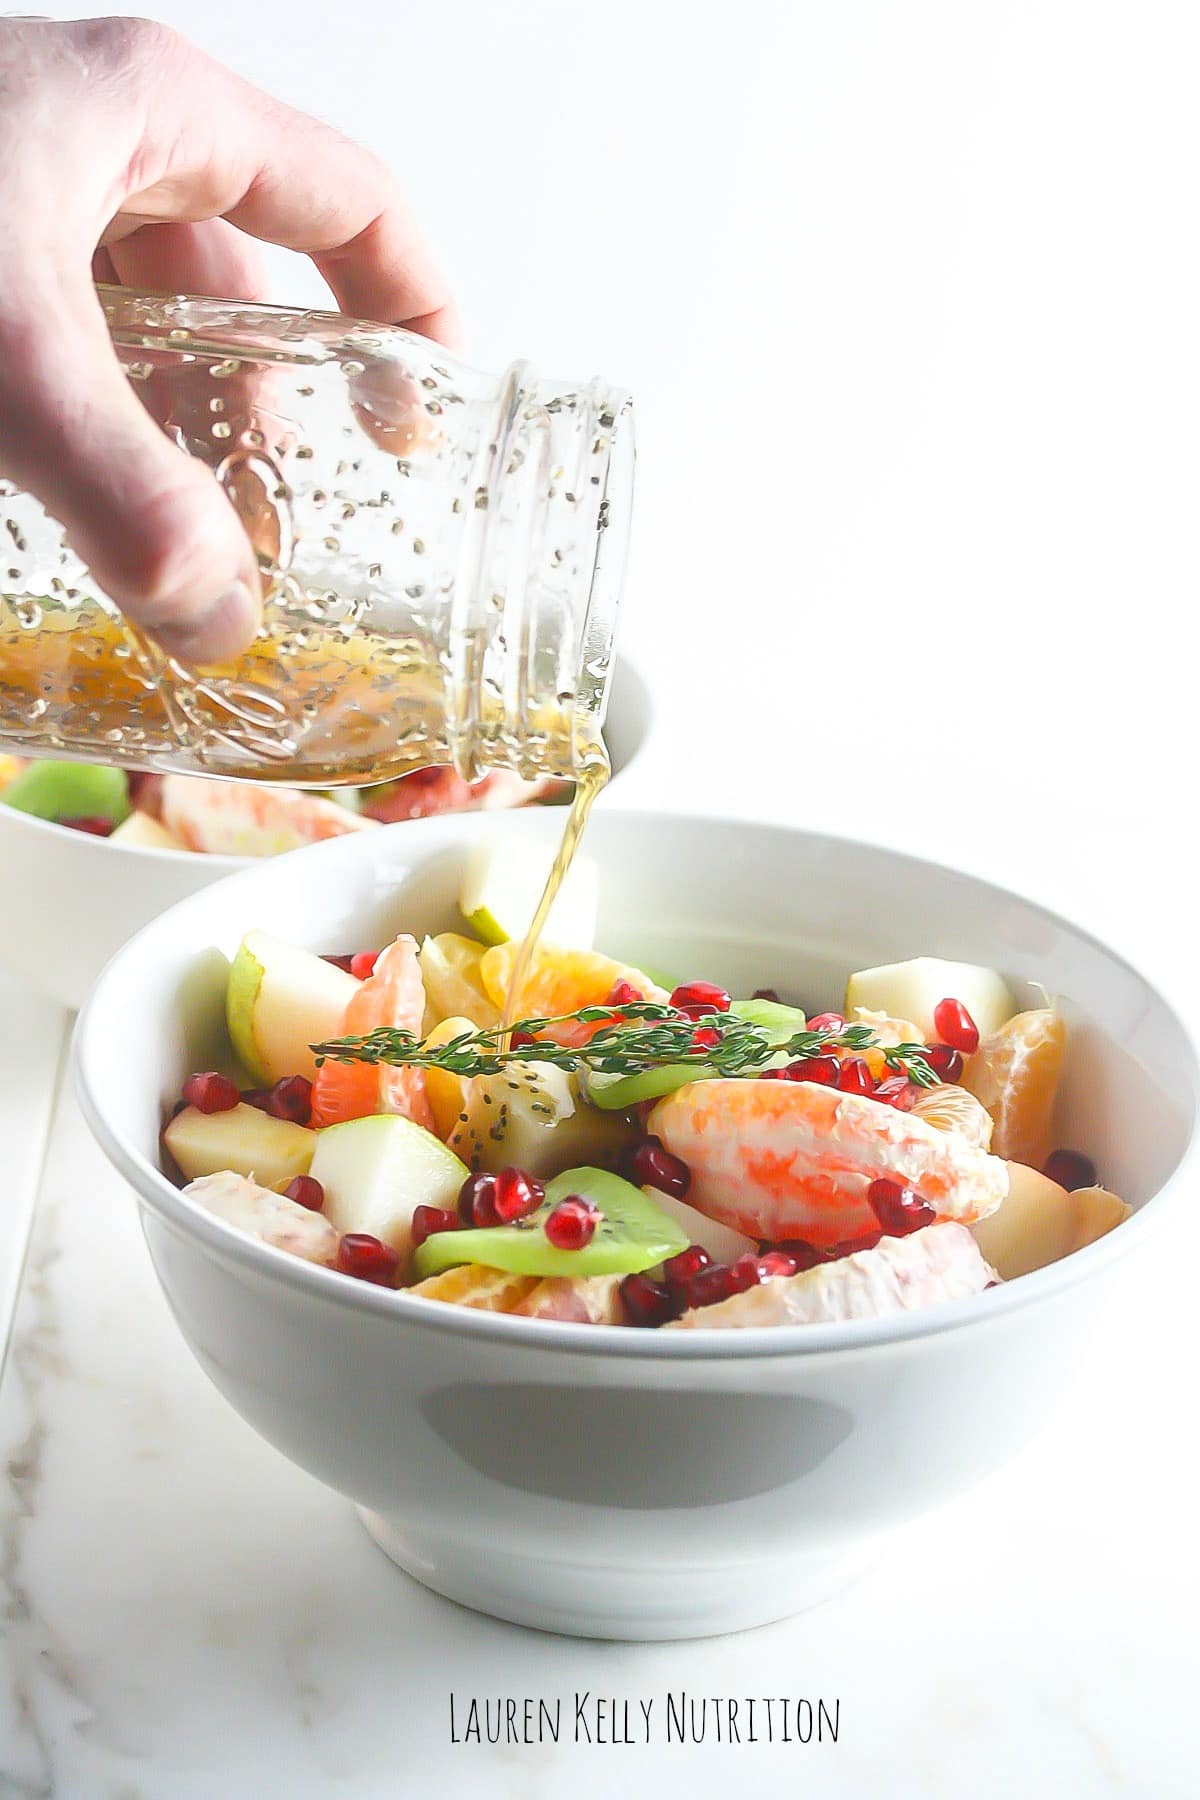 Pouring the Ginger Chia Dressing from a clear jar onto winter fruit salad.